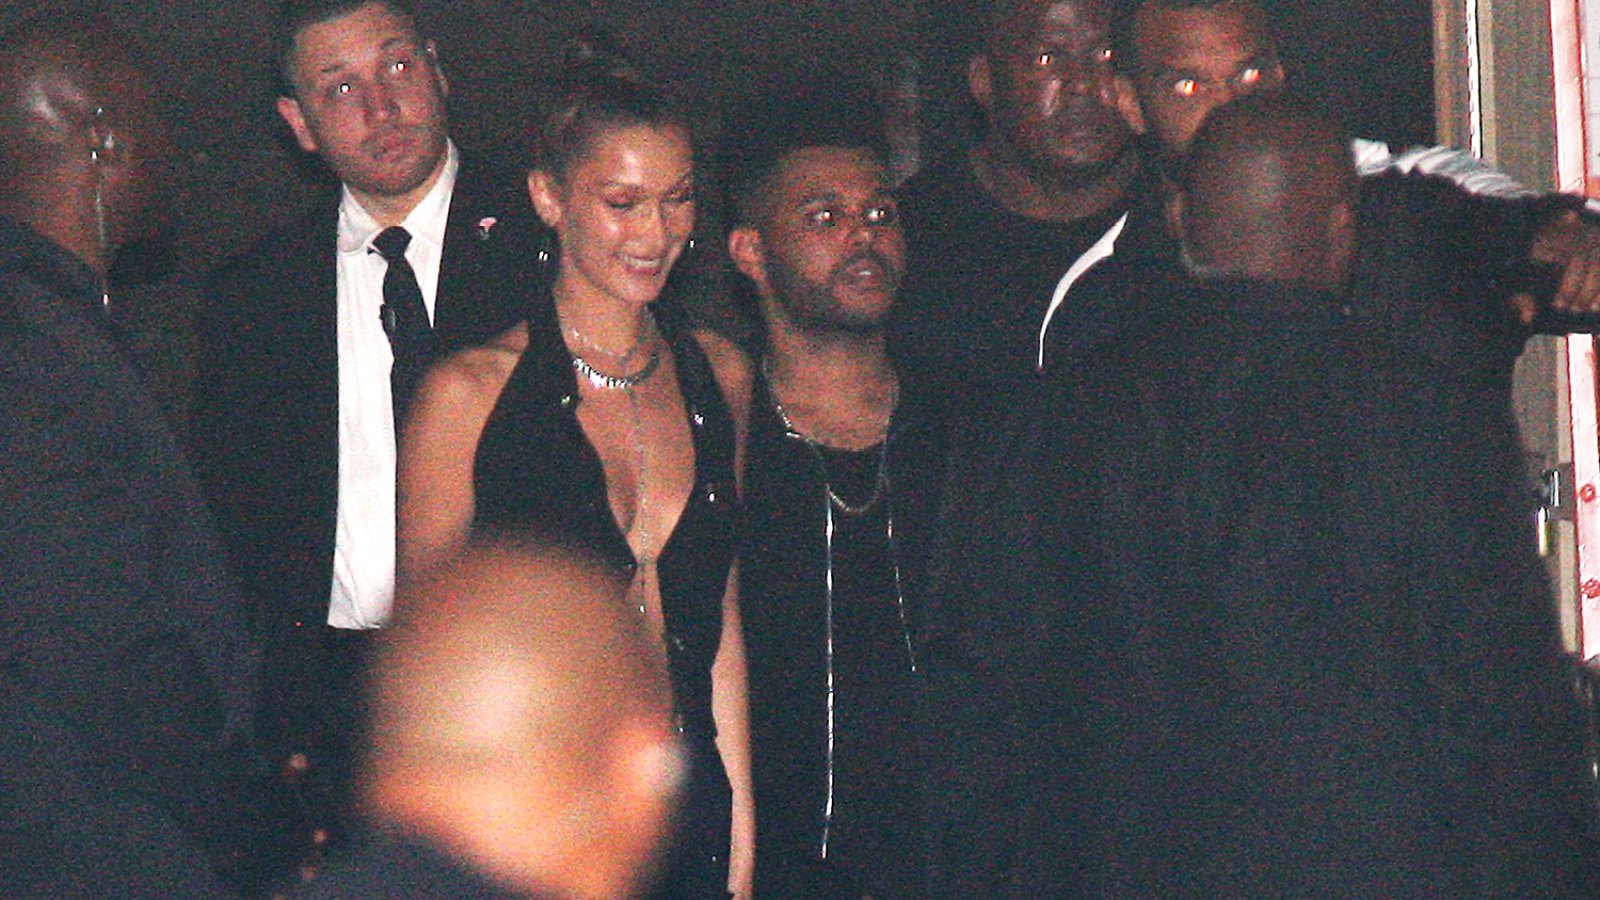 Bella Hadid and The Weeknd are spotted leaving from the back of the Delilah club after celebrating Kylie Jenner's 21st birthday party in West Hollywood on August 10, 2018.